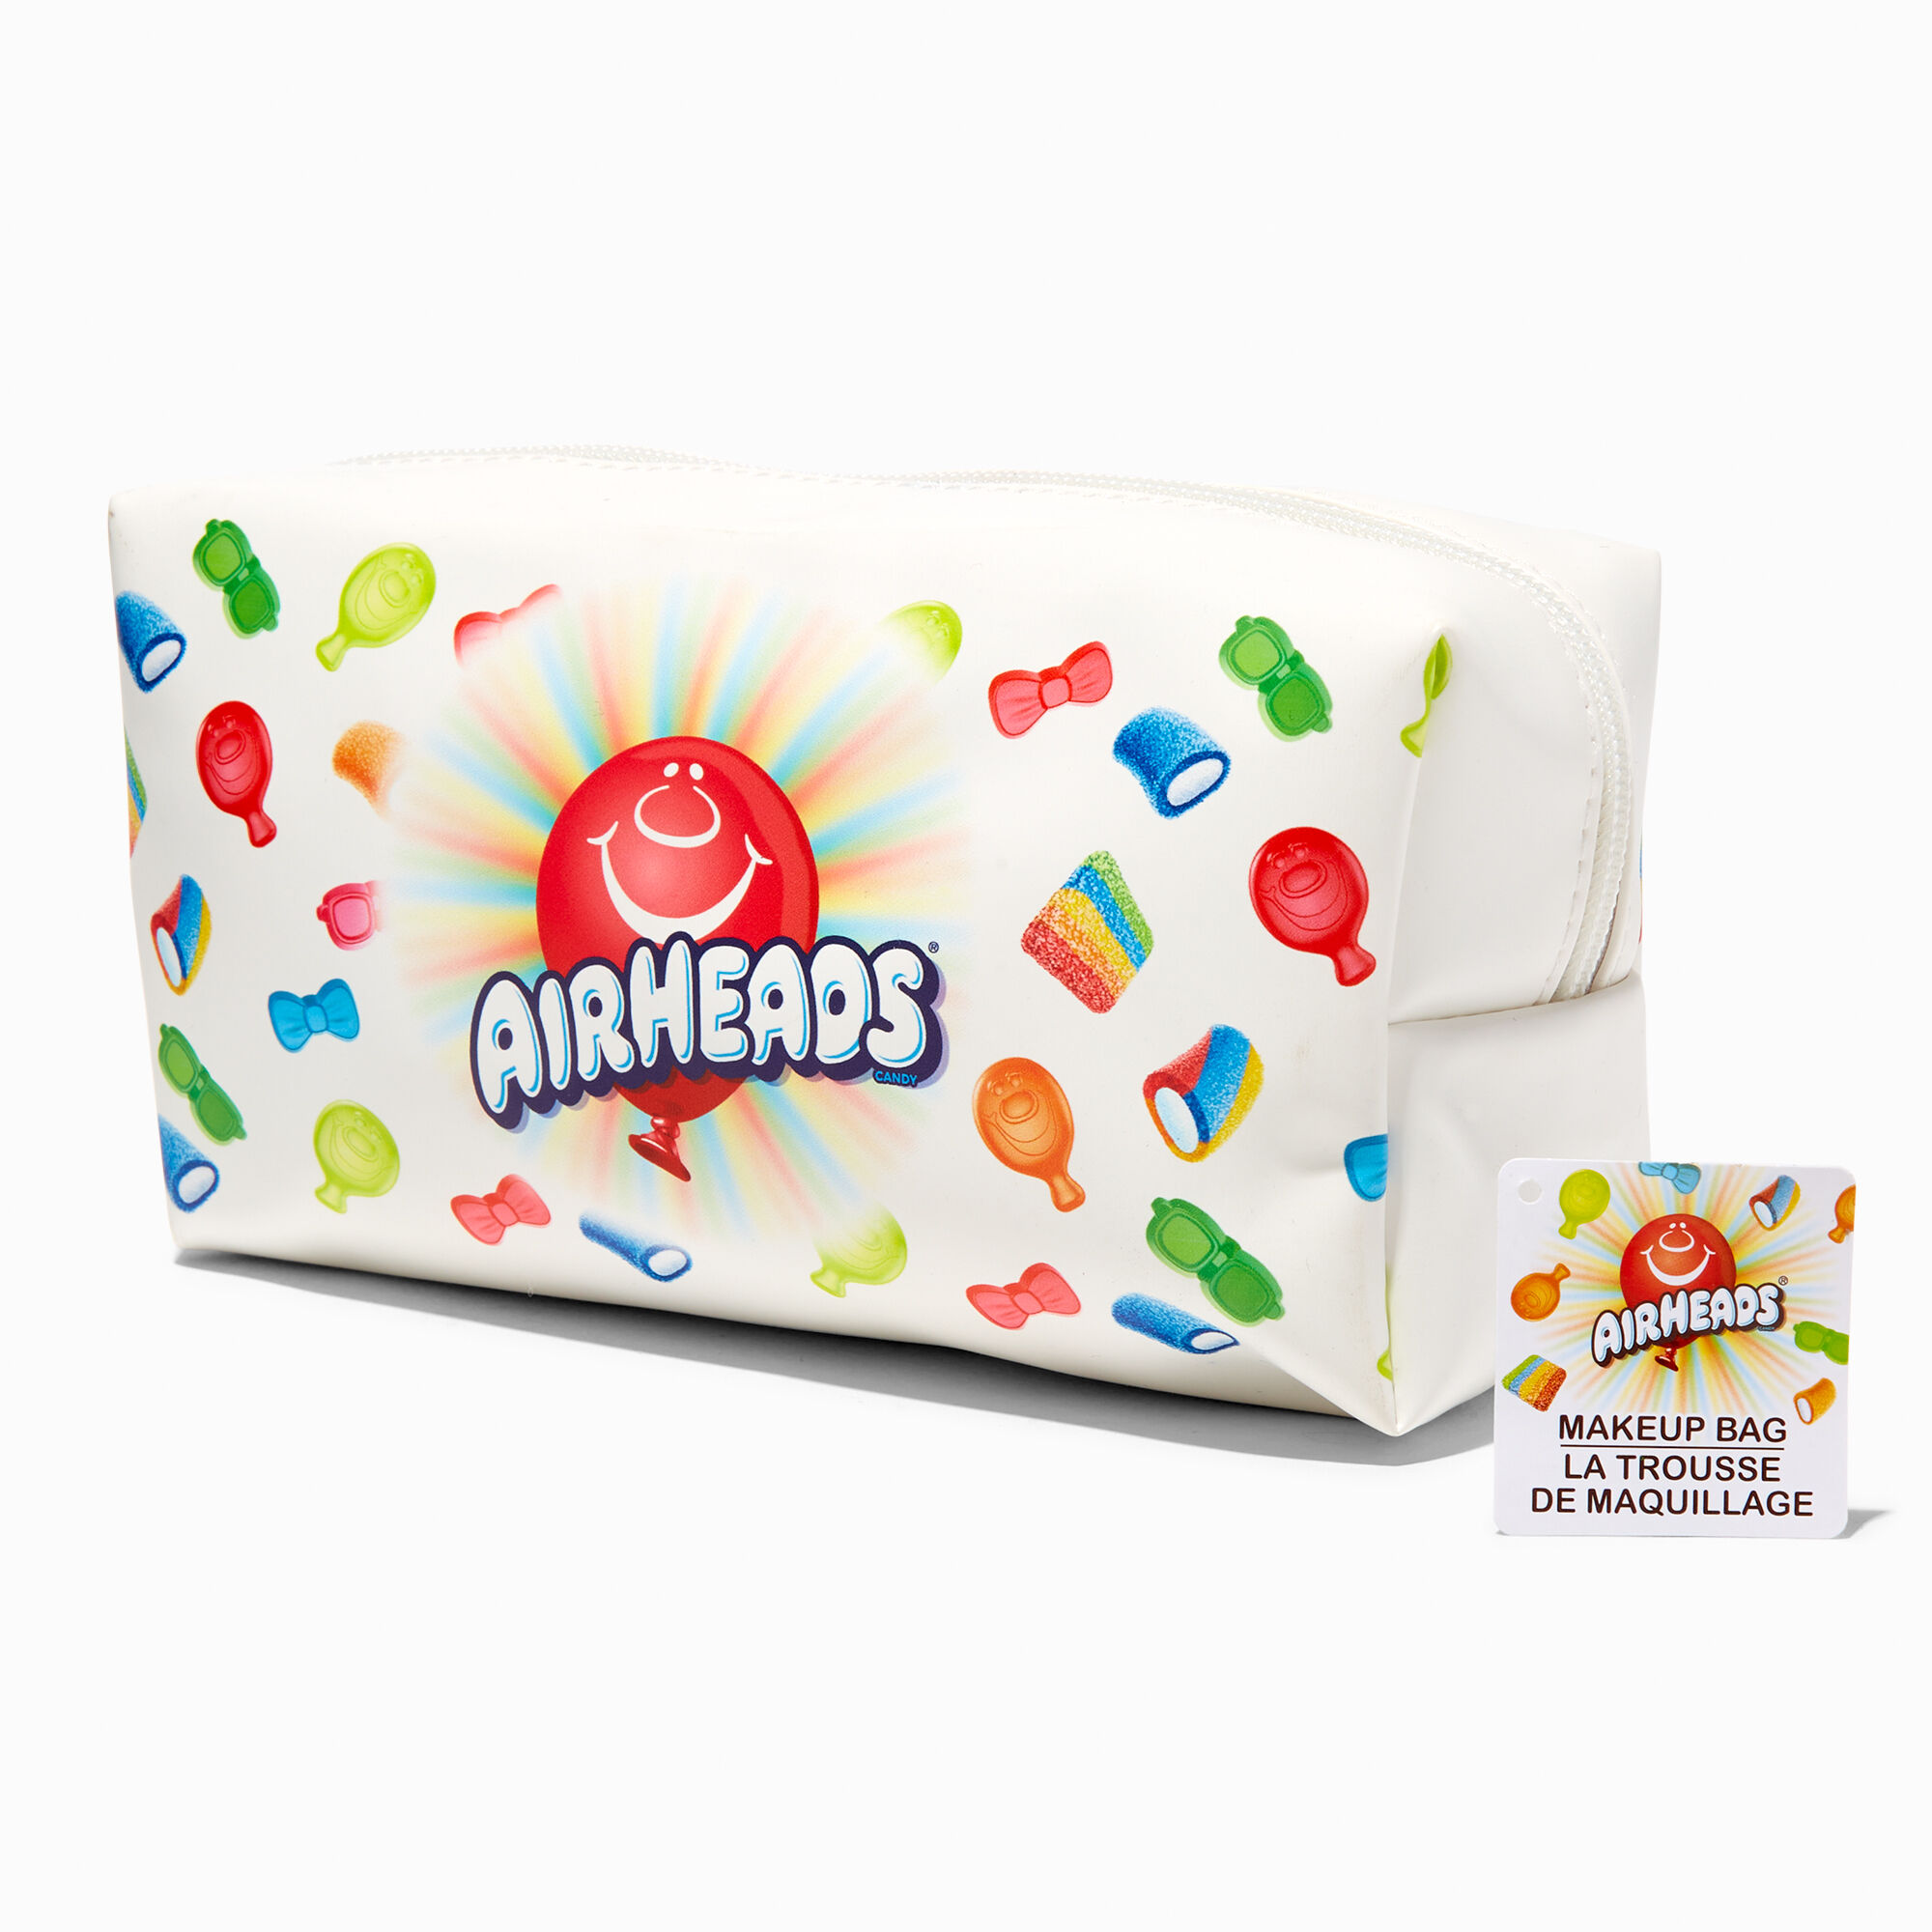 View Claires Airheads Makeup Bag information